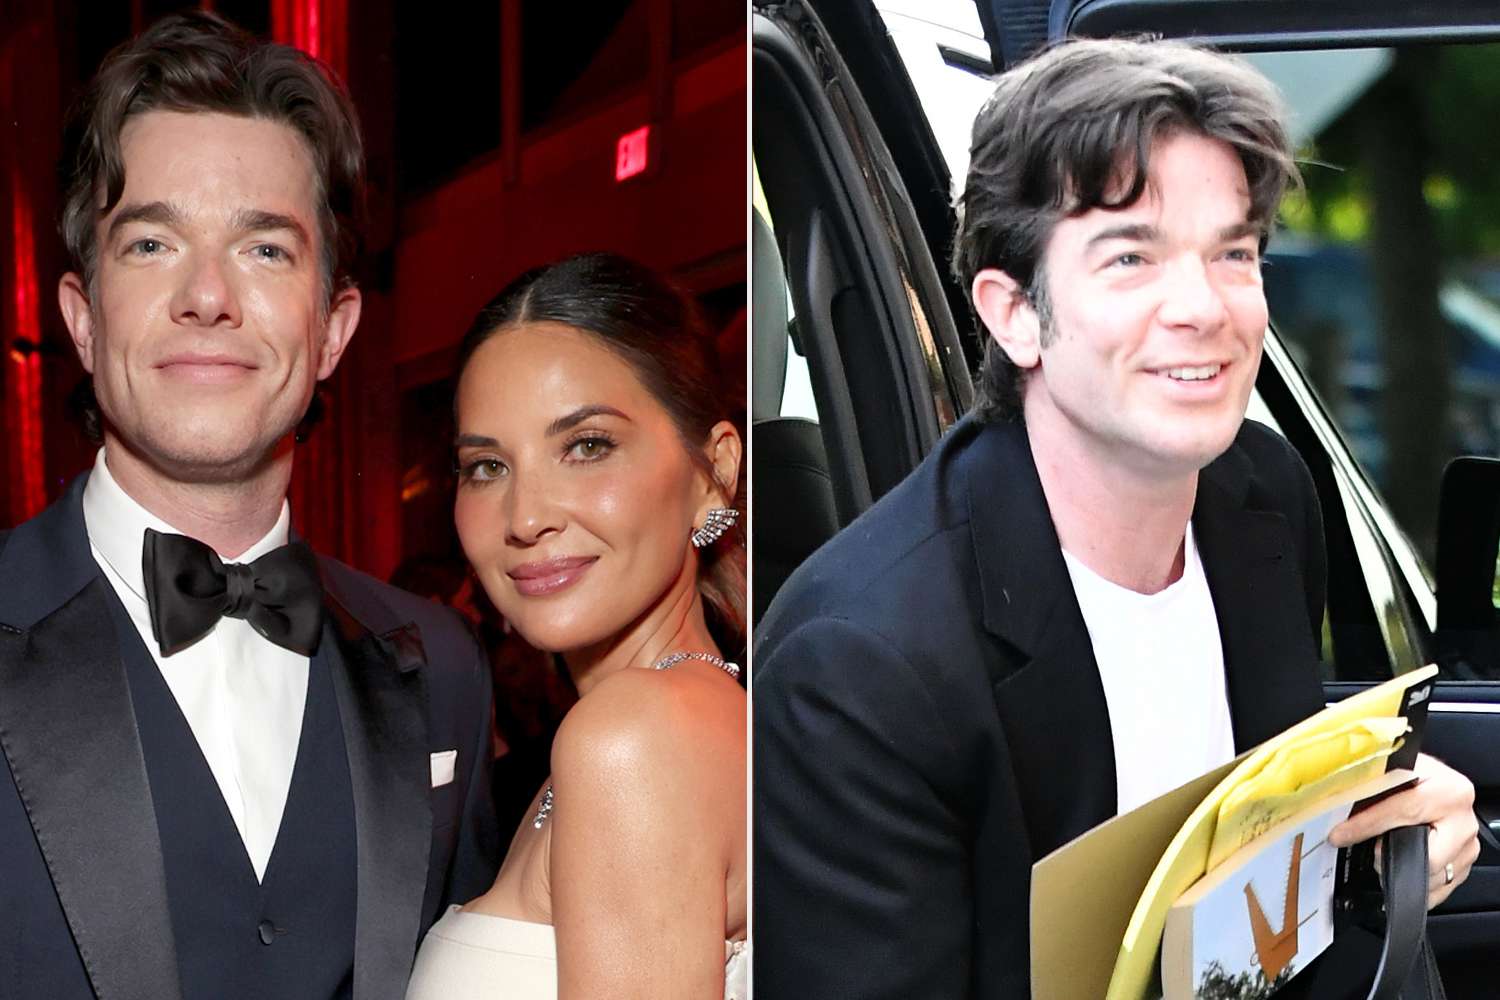 John Mulaney Rocks His Wedding Band for the First Time Since Marrying Olivia Munn — See His Ring!